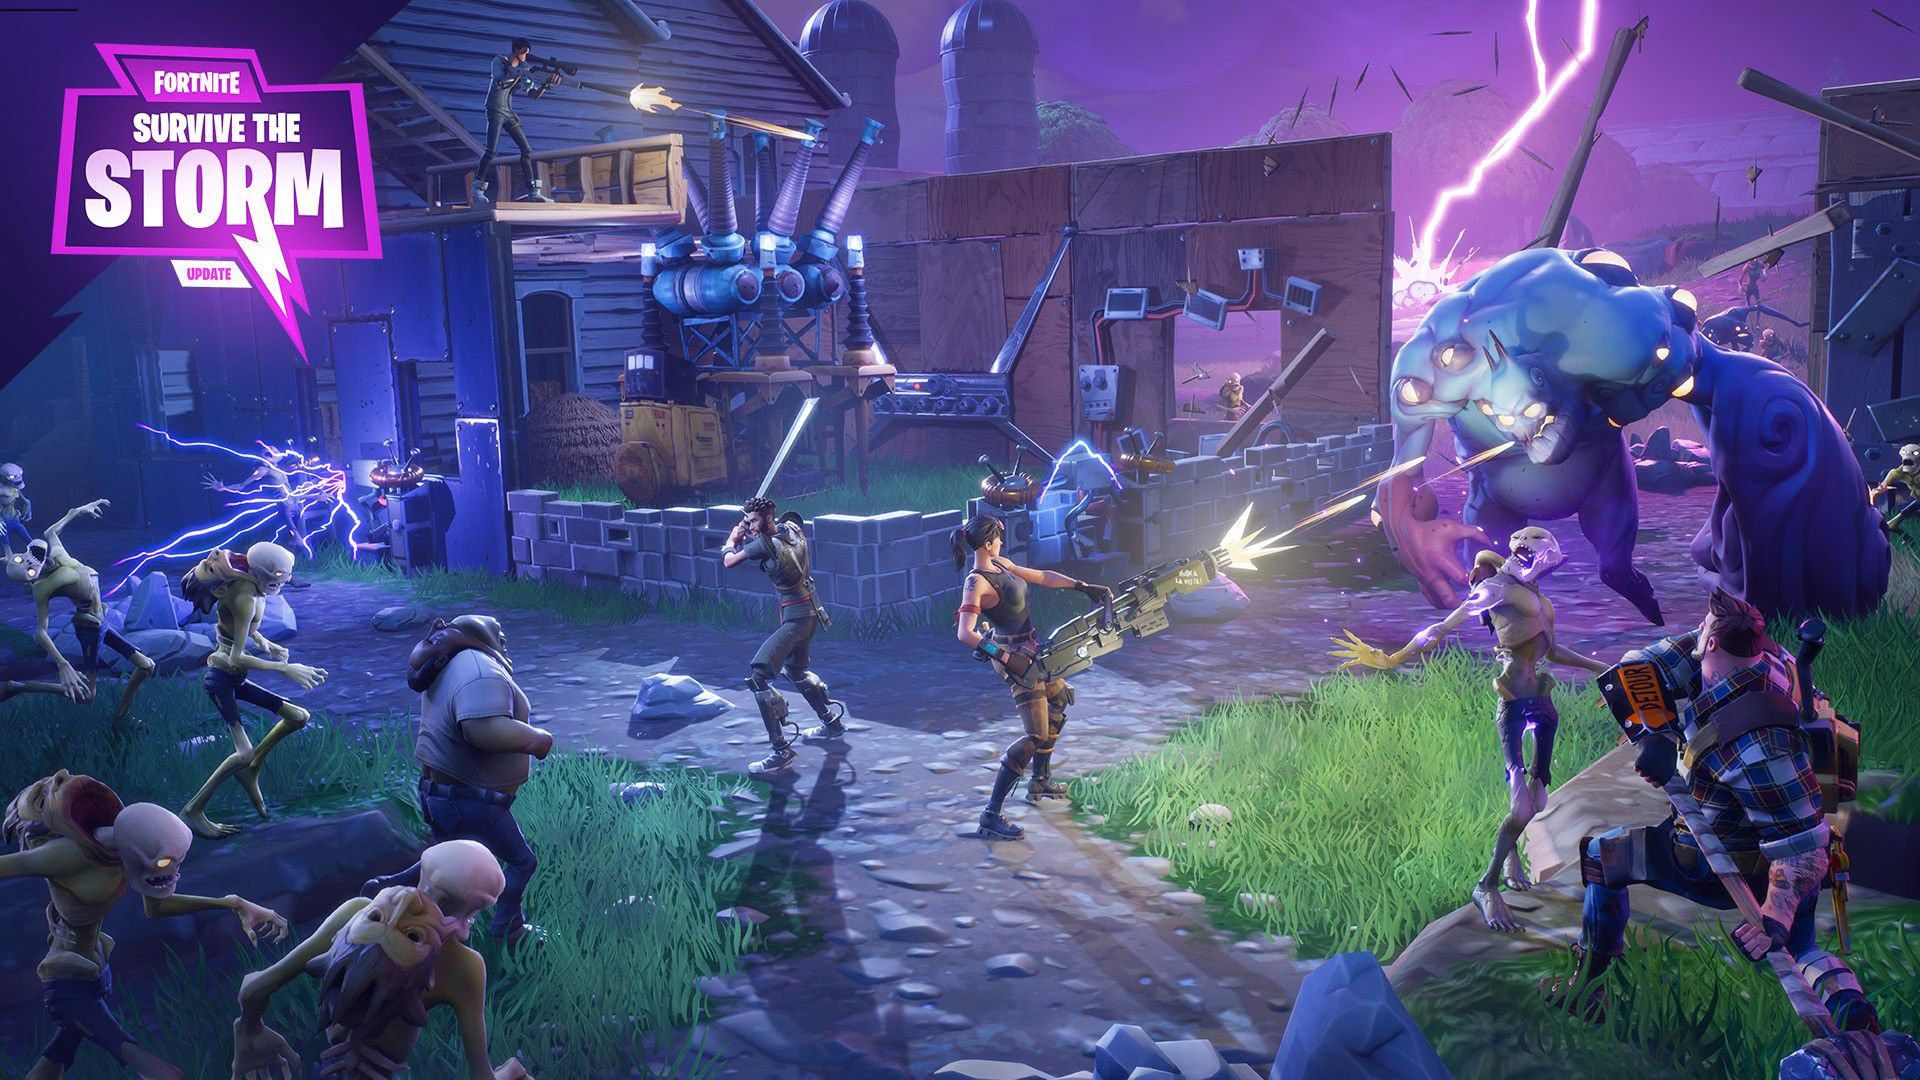 Free Fortnite Wallpapers in 1920x1080